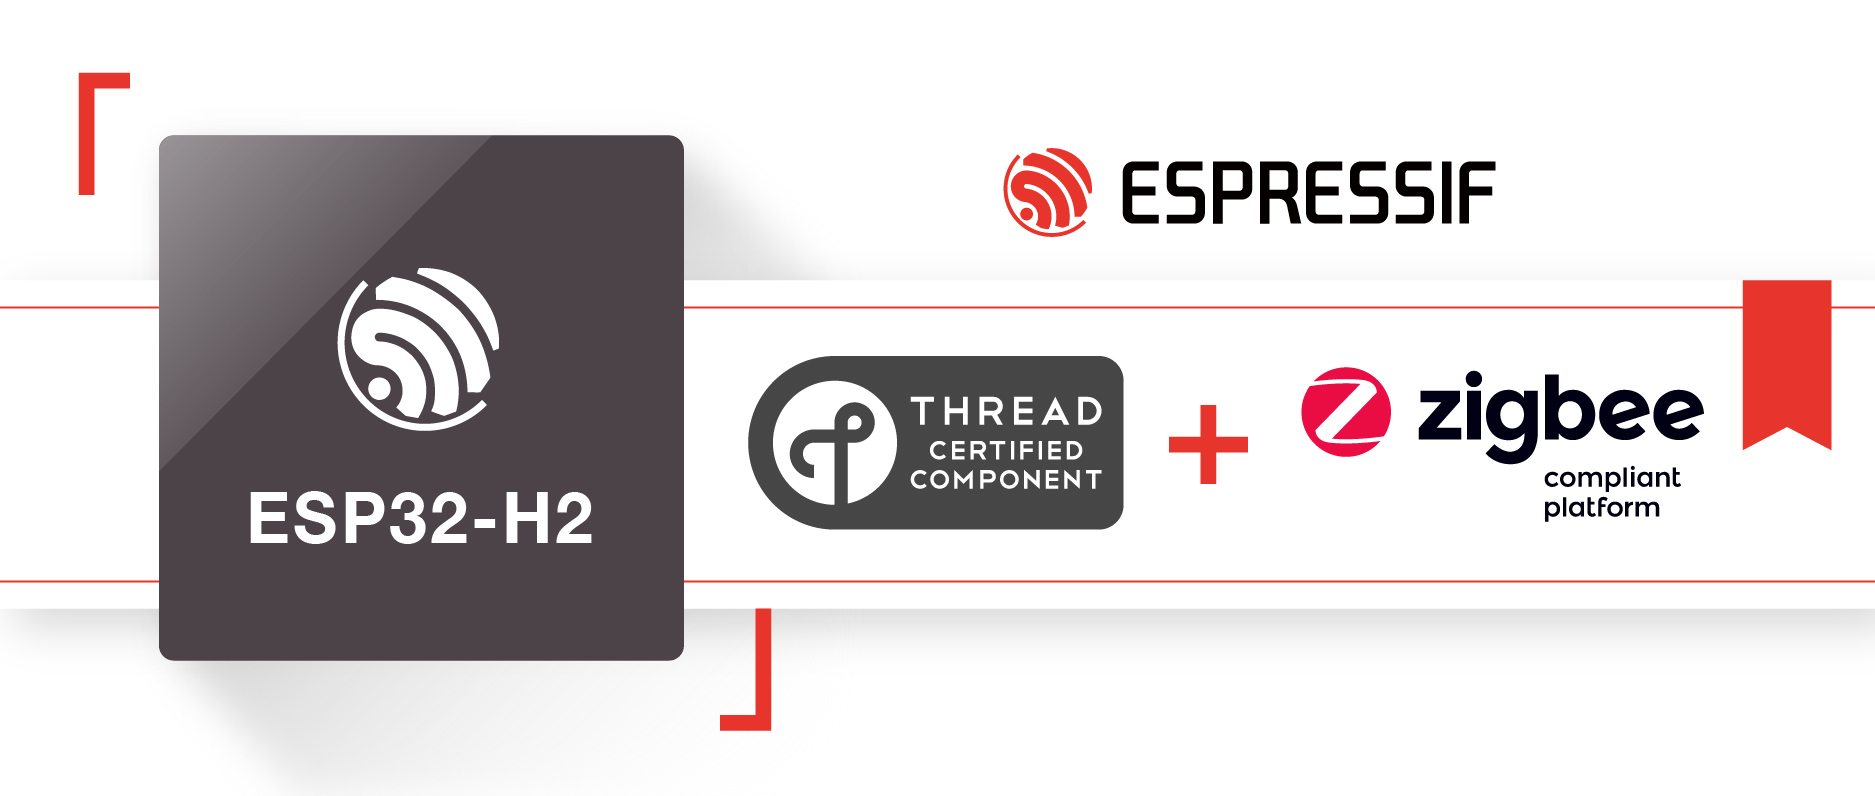 Zigbee and Matter on ESP32-H2 - IoT Assistant